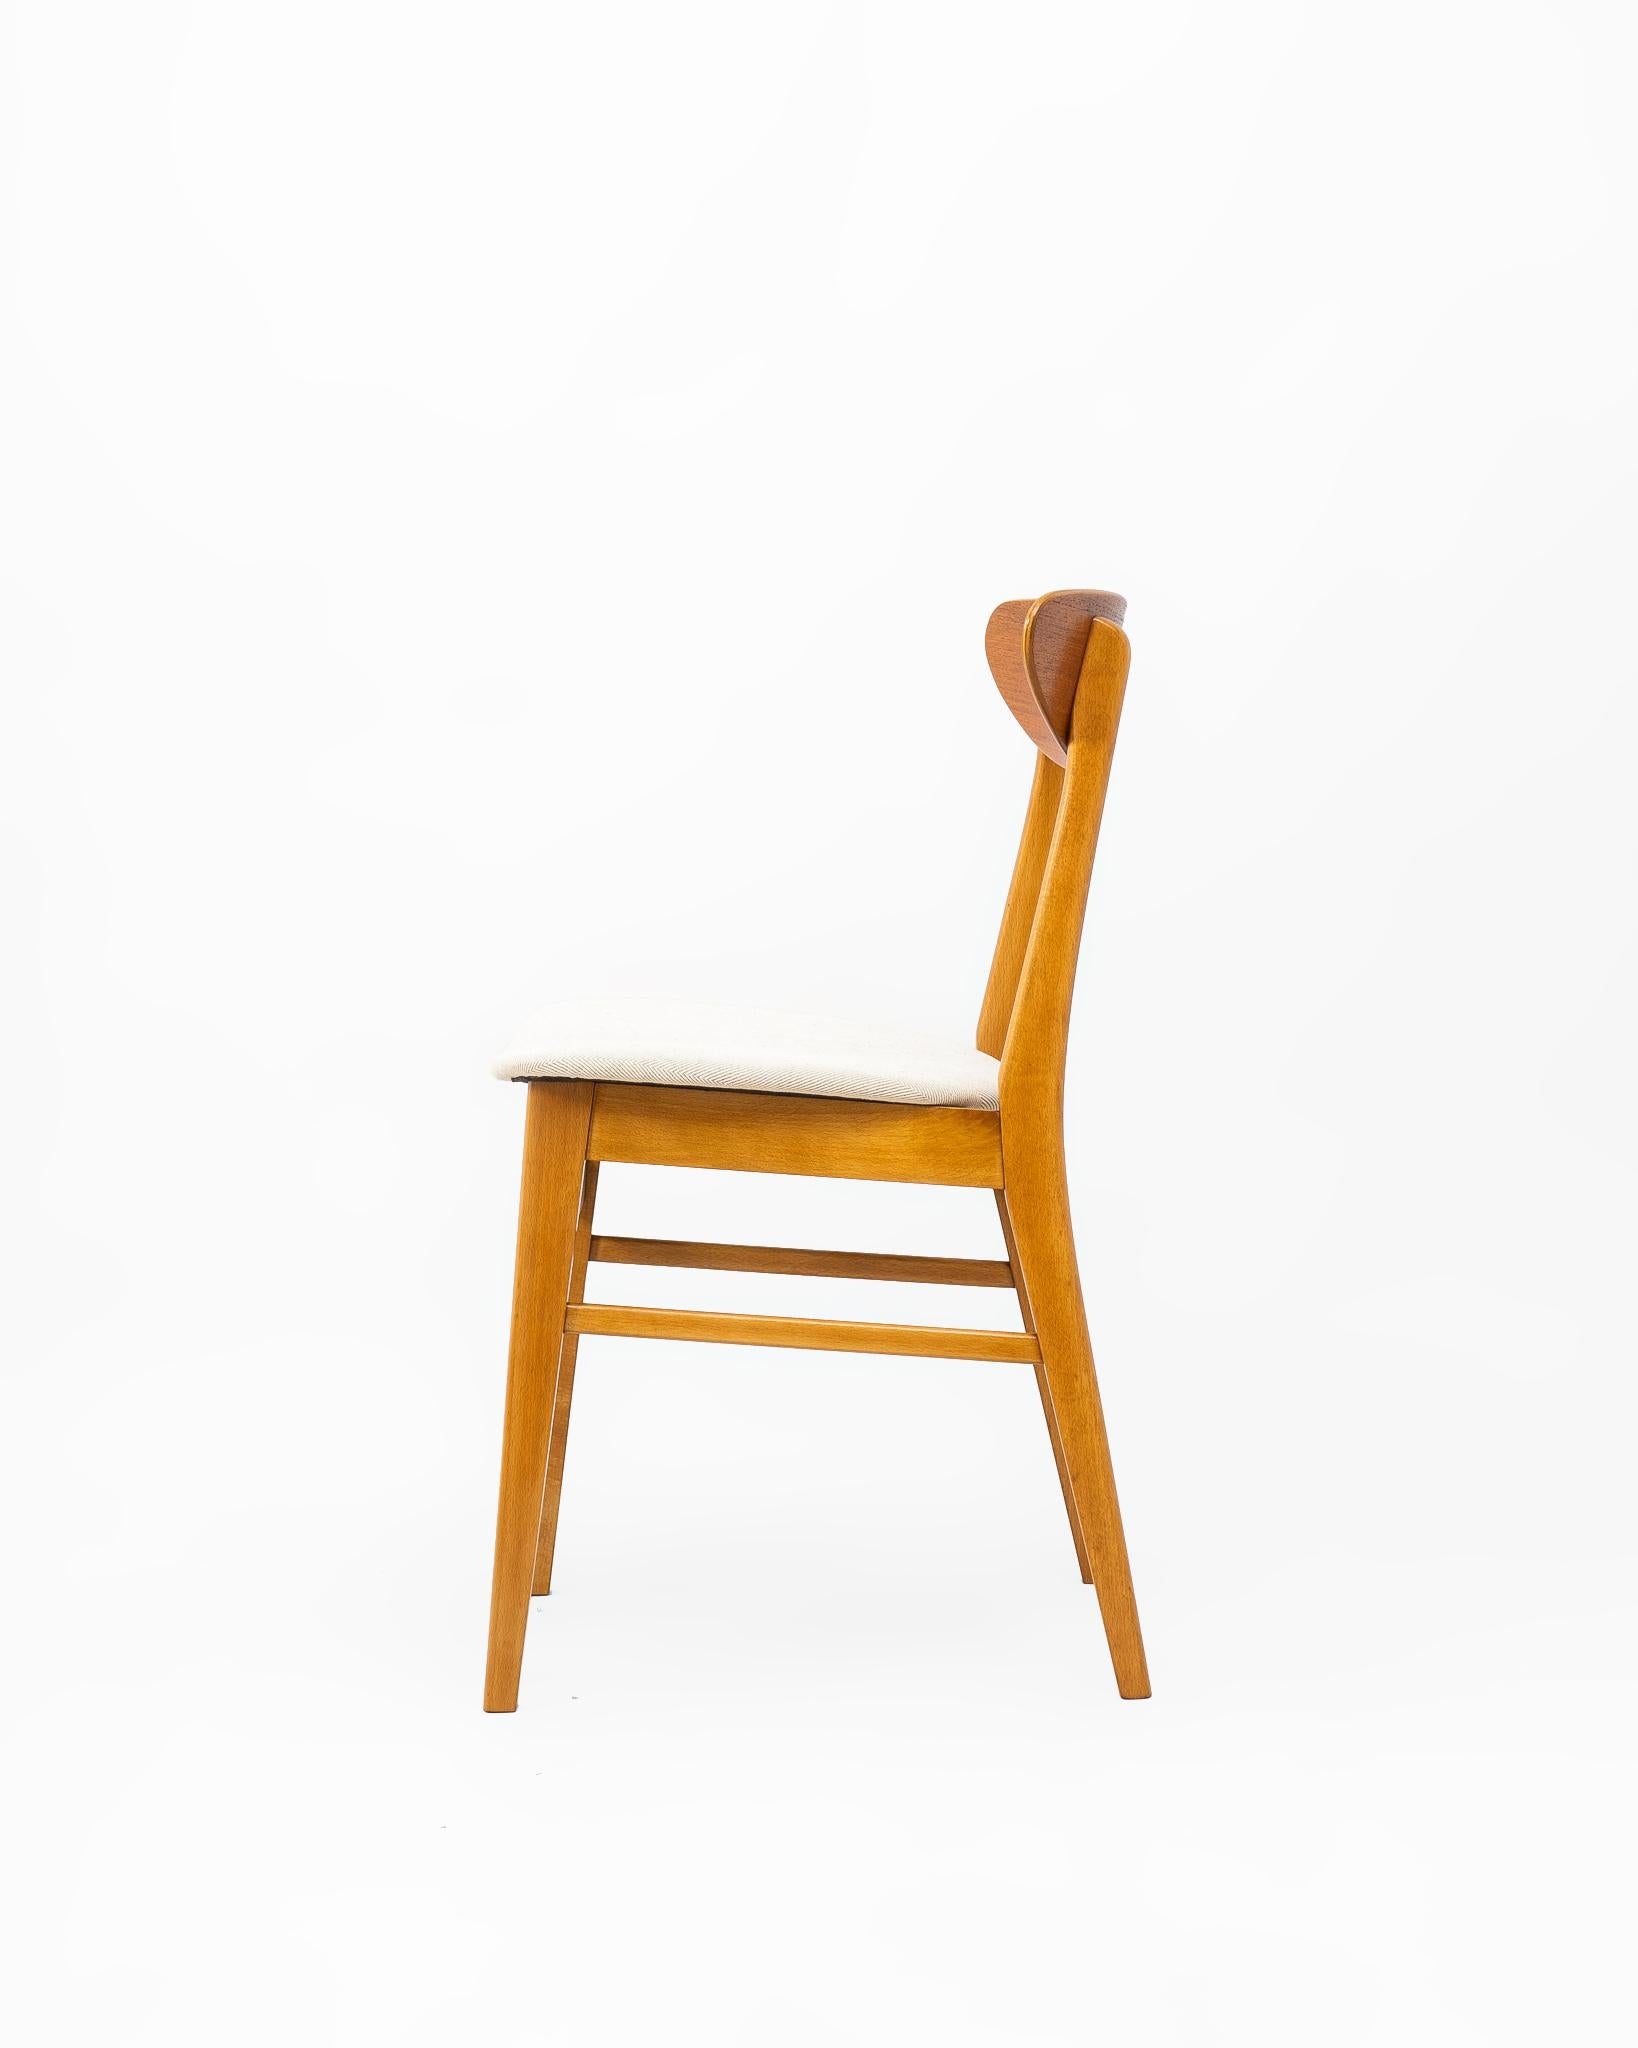 Danish Set of 4 Teak and Beech Chairs Model 210 from Farstrup Stolefabrik, circa 1960 For Sale